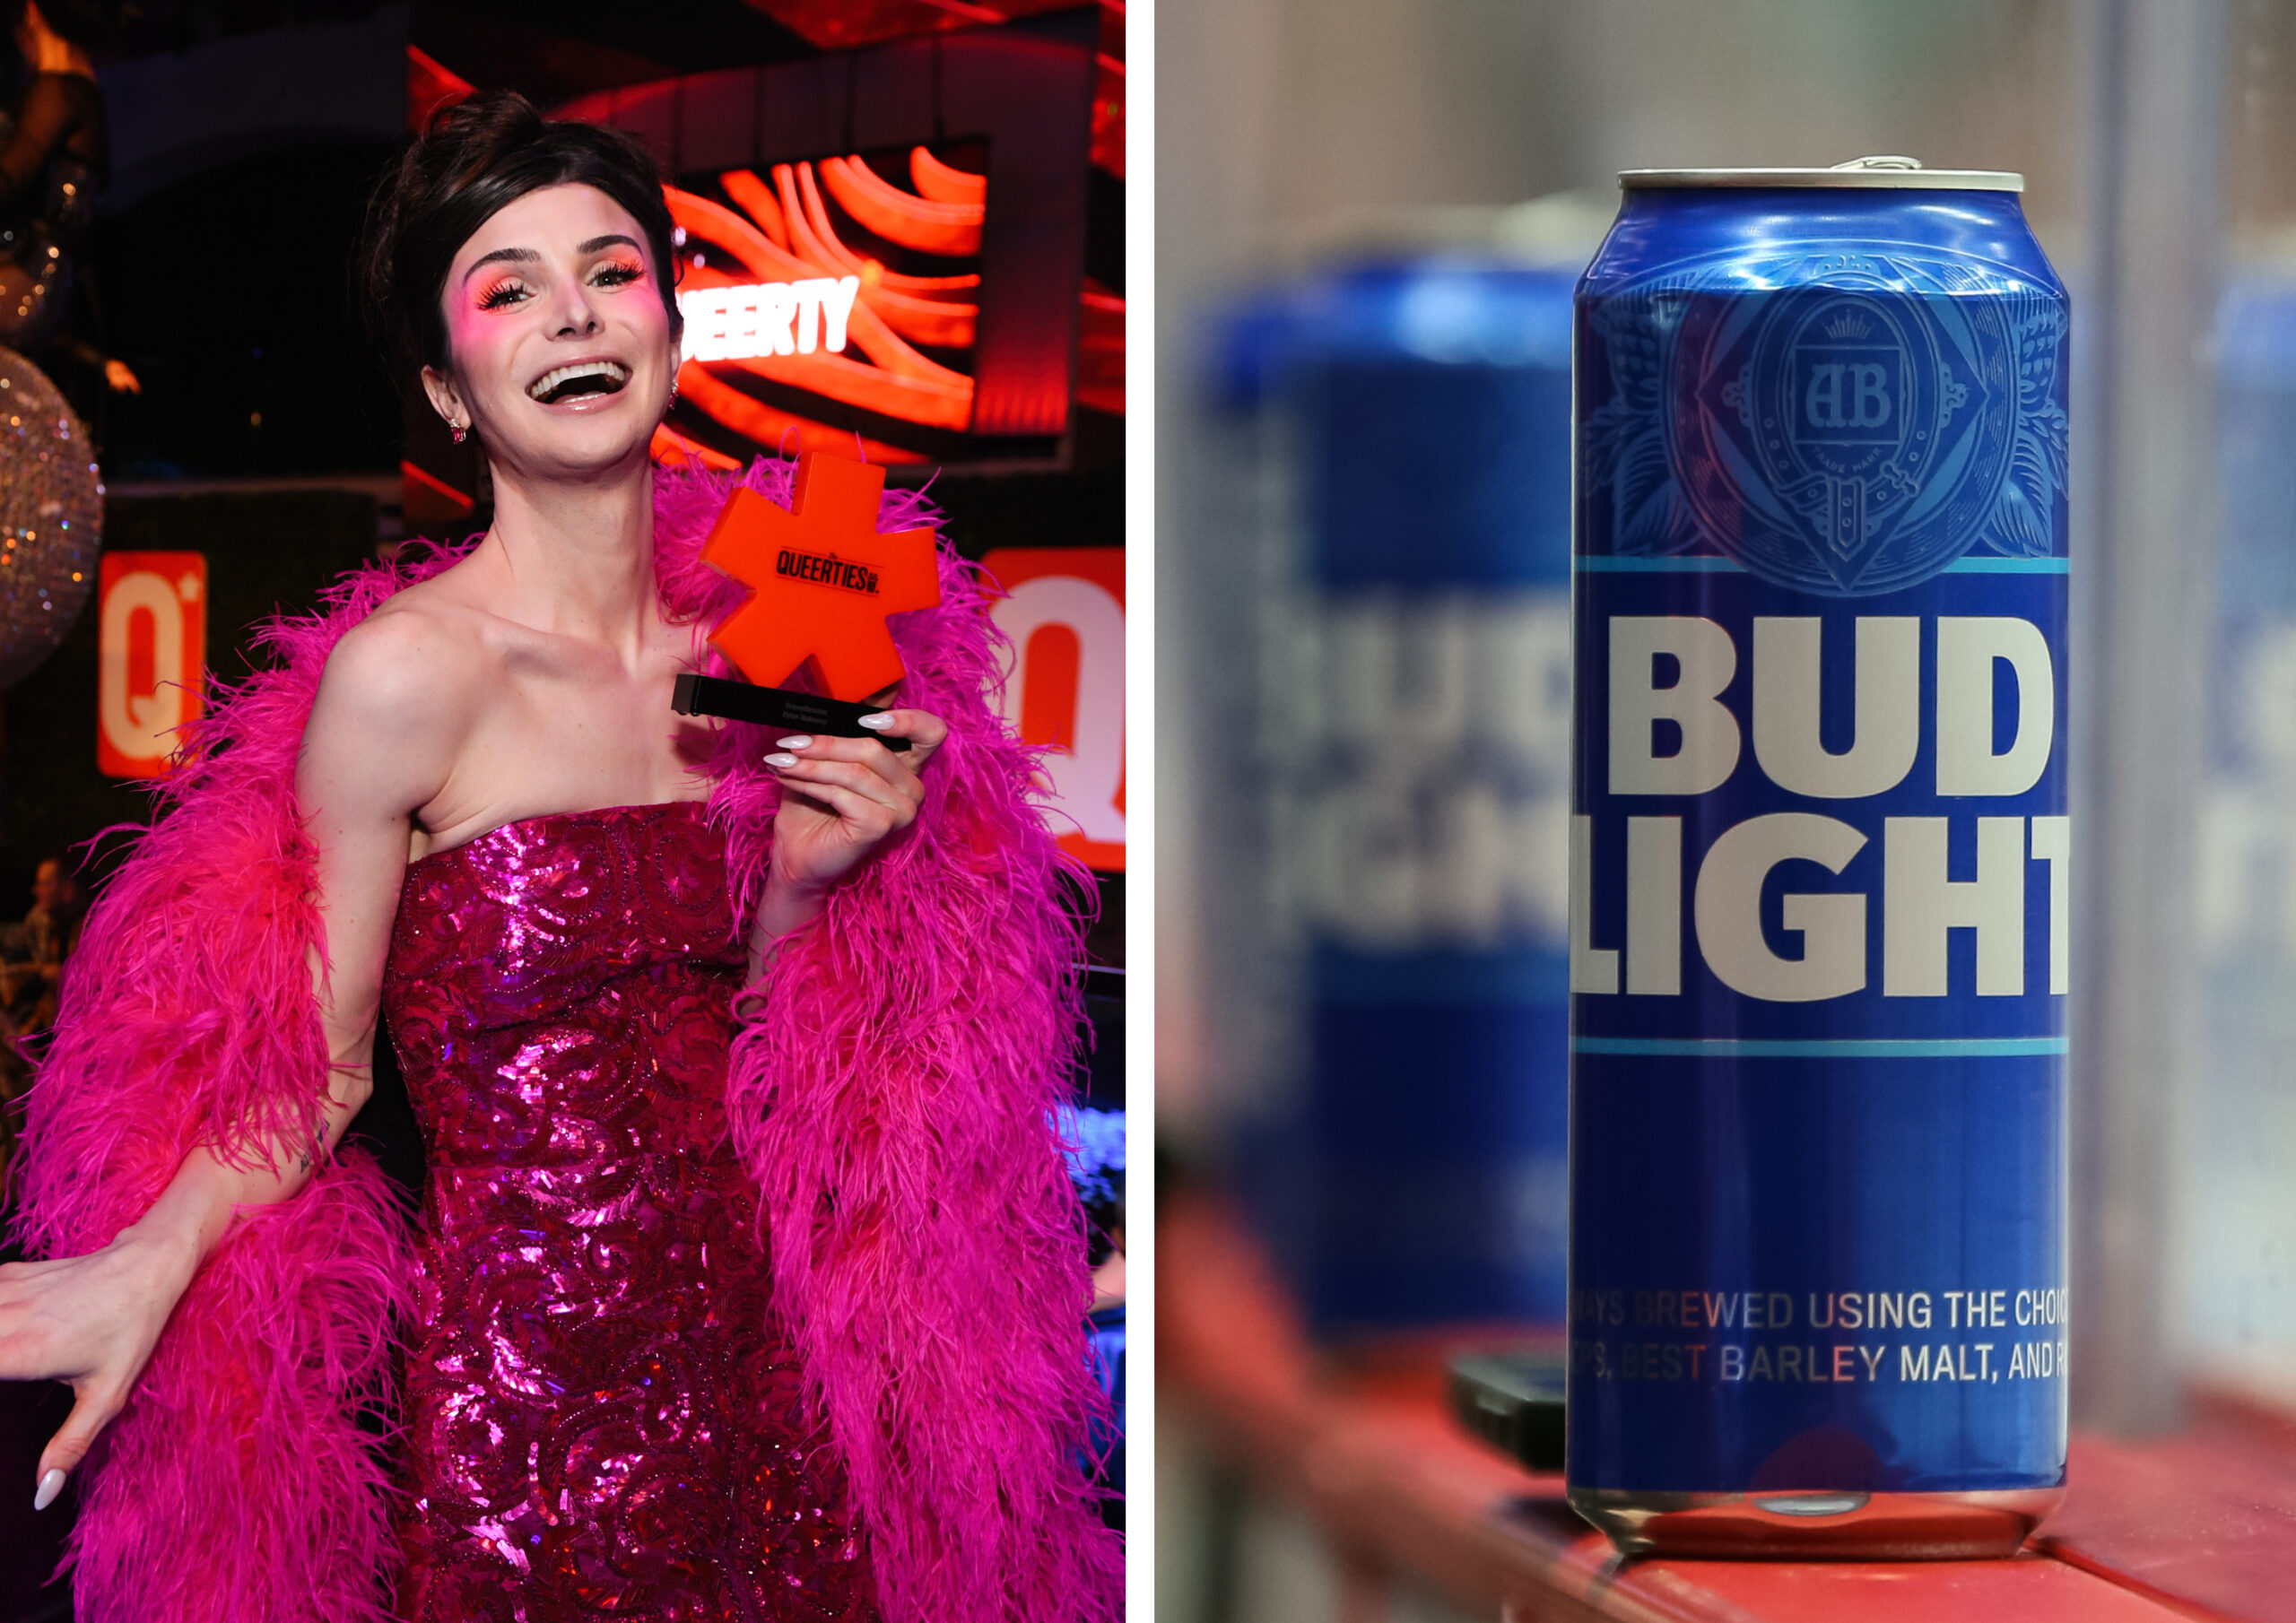 Agency responsible for Bud Light controversy wins ad industry’s Oscar.